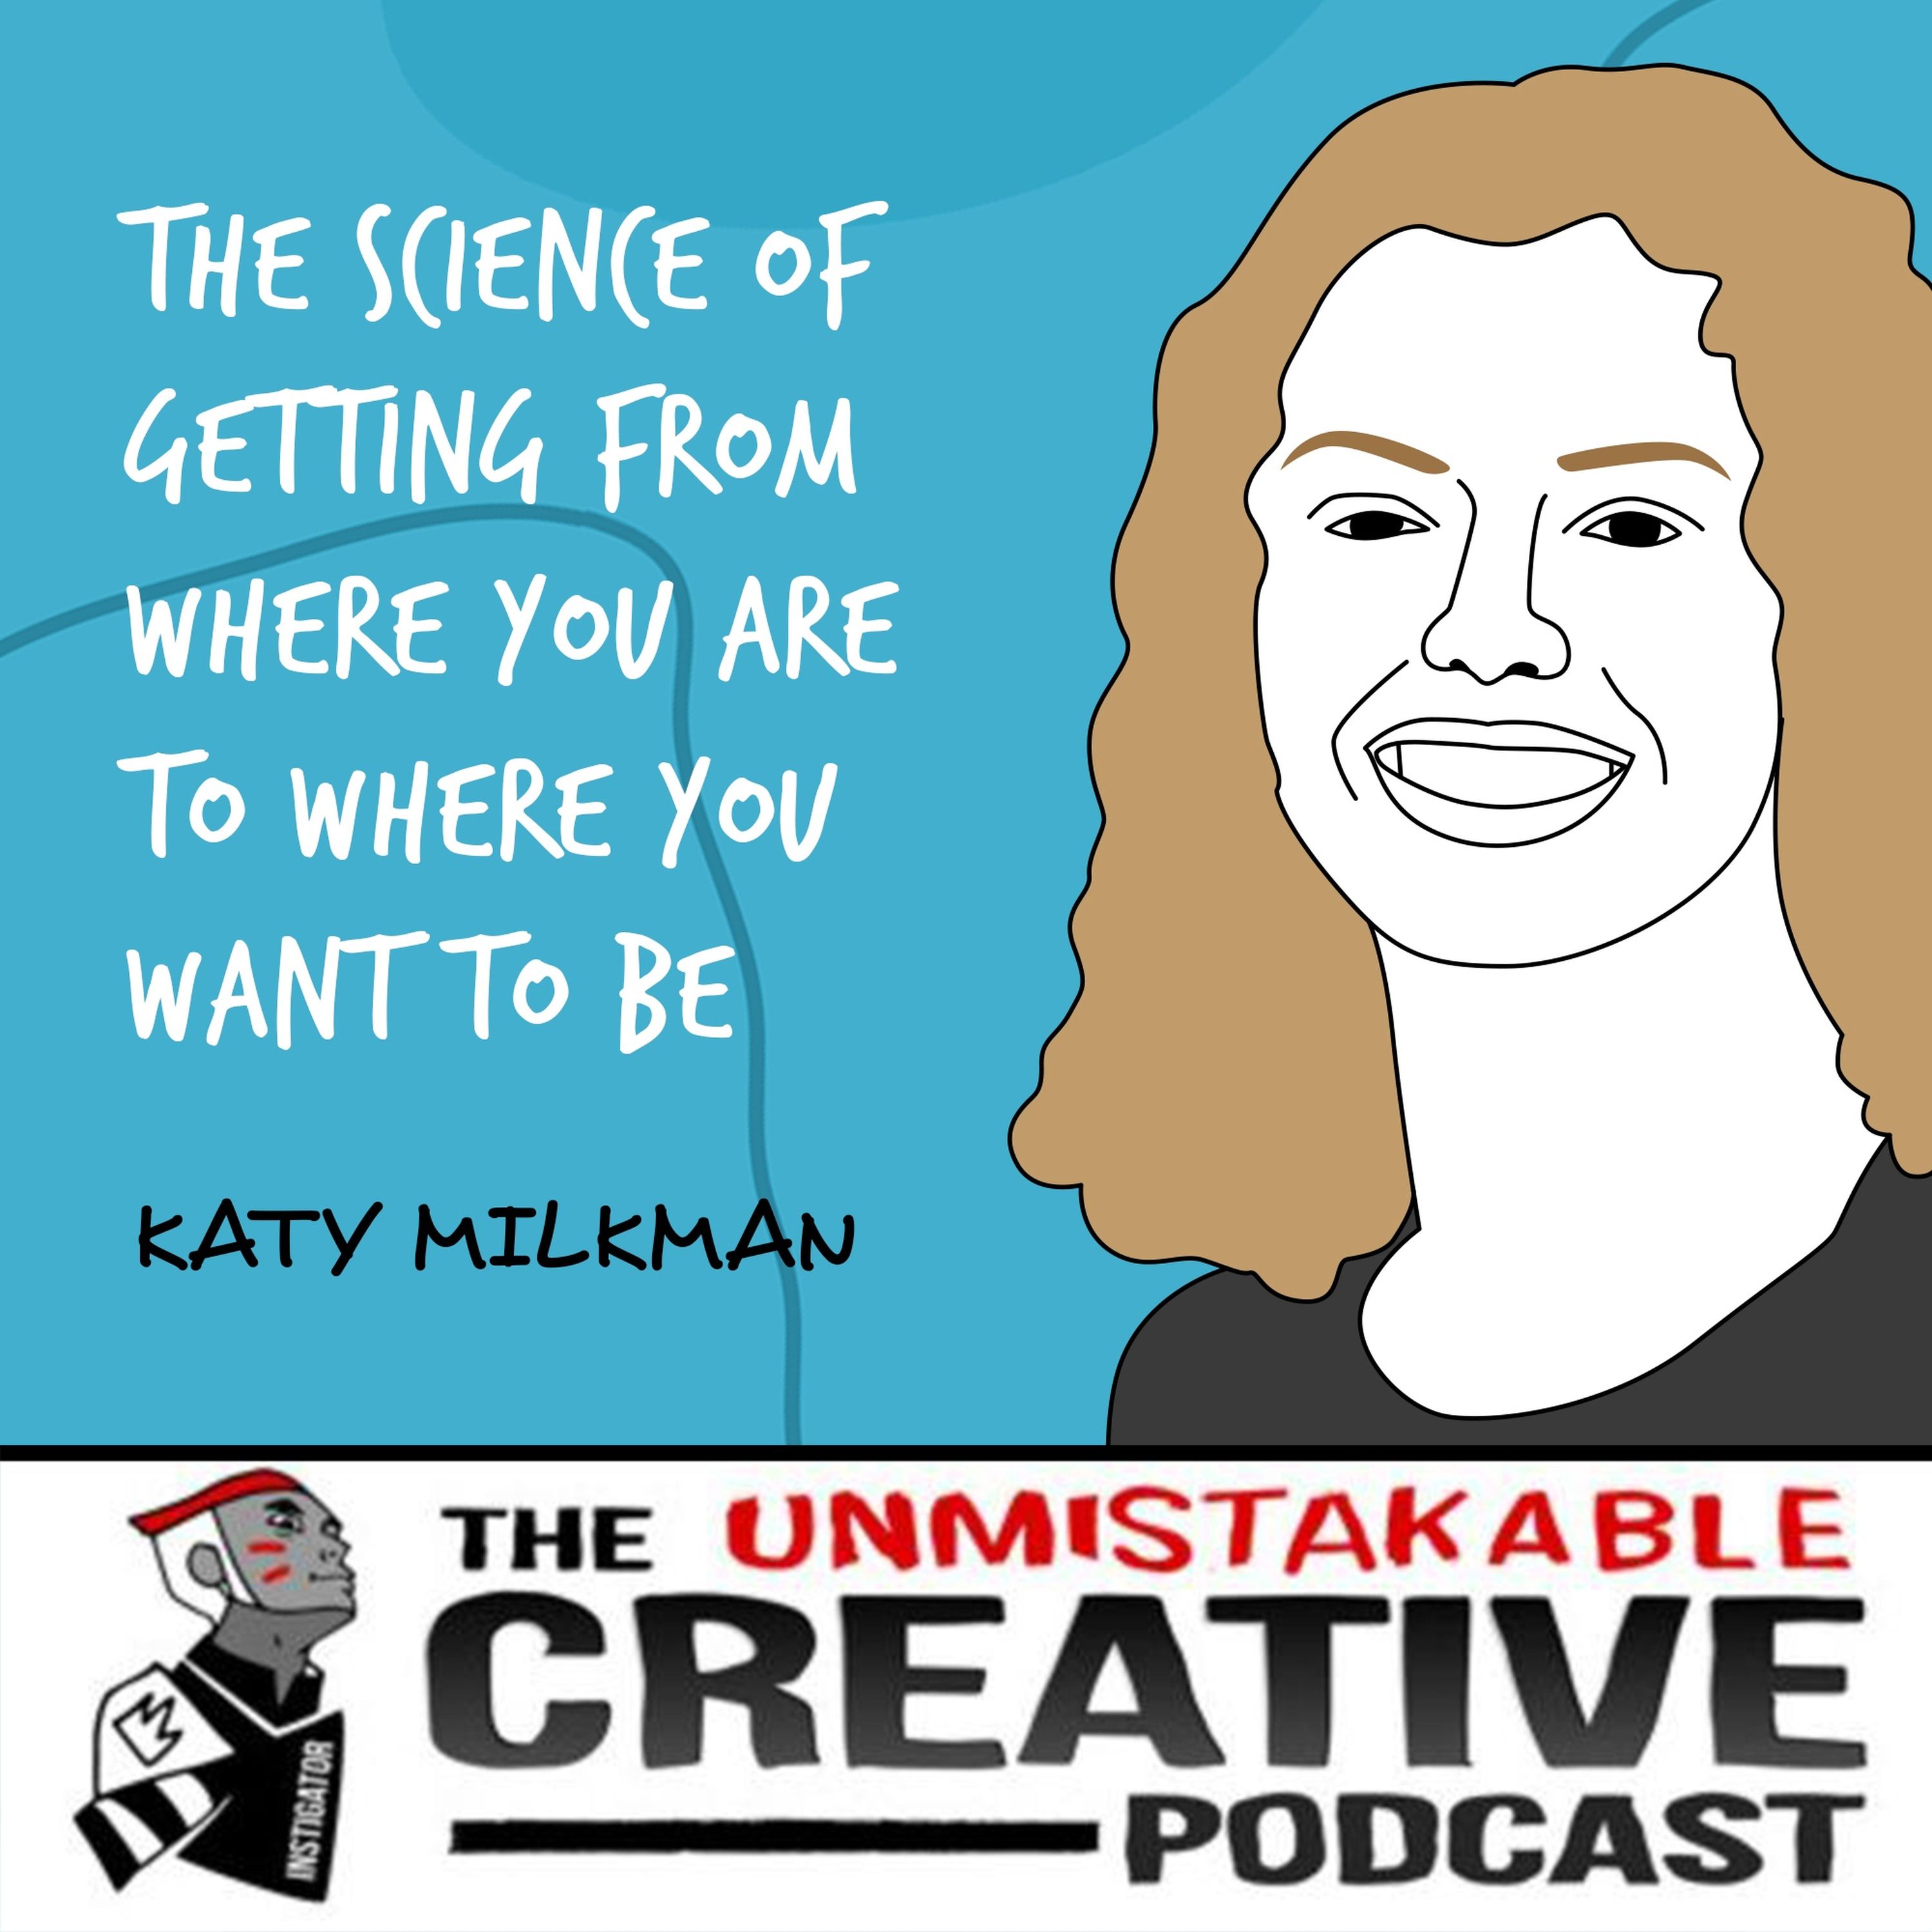 Best of 2021: Katy Milkman | The Science of Getting From Where You Are to Where You Want to Be Image